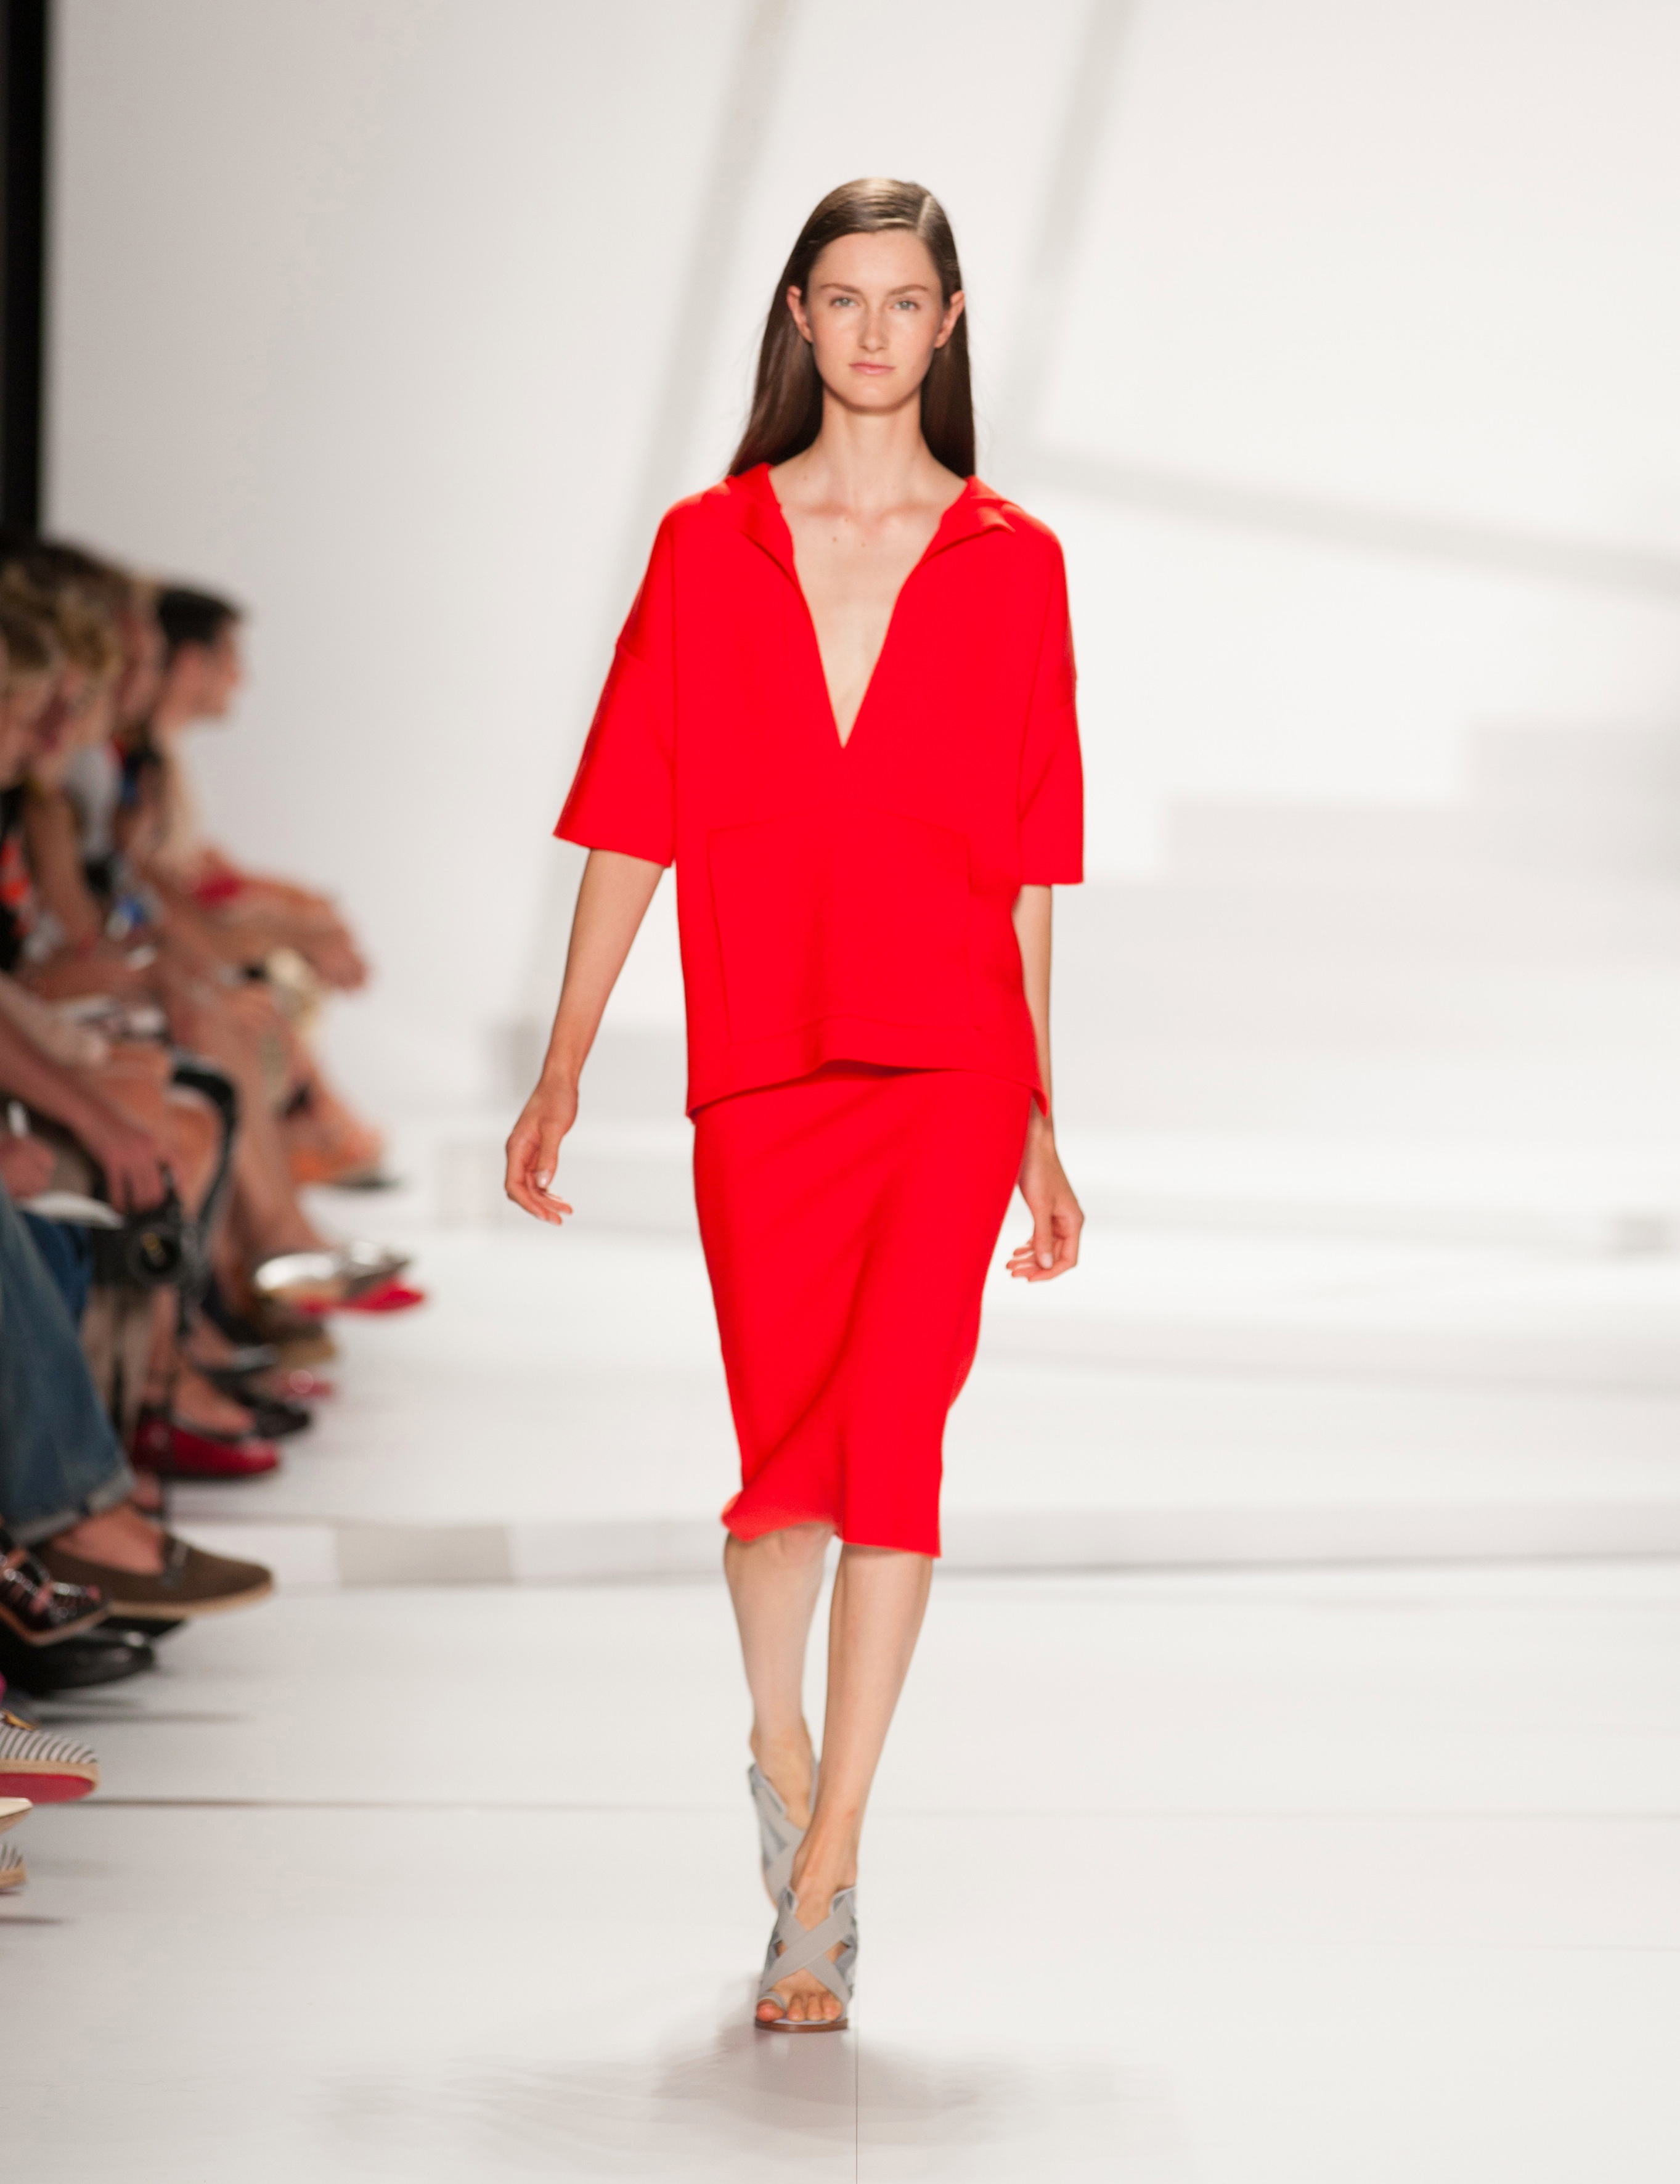 10 favourite looks from Lacoste spring 2013 show - Chatelaine